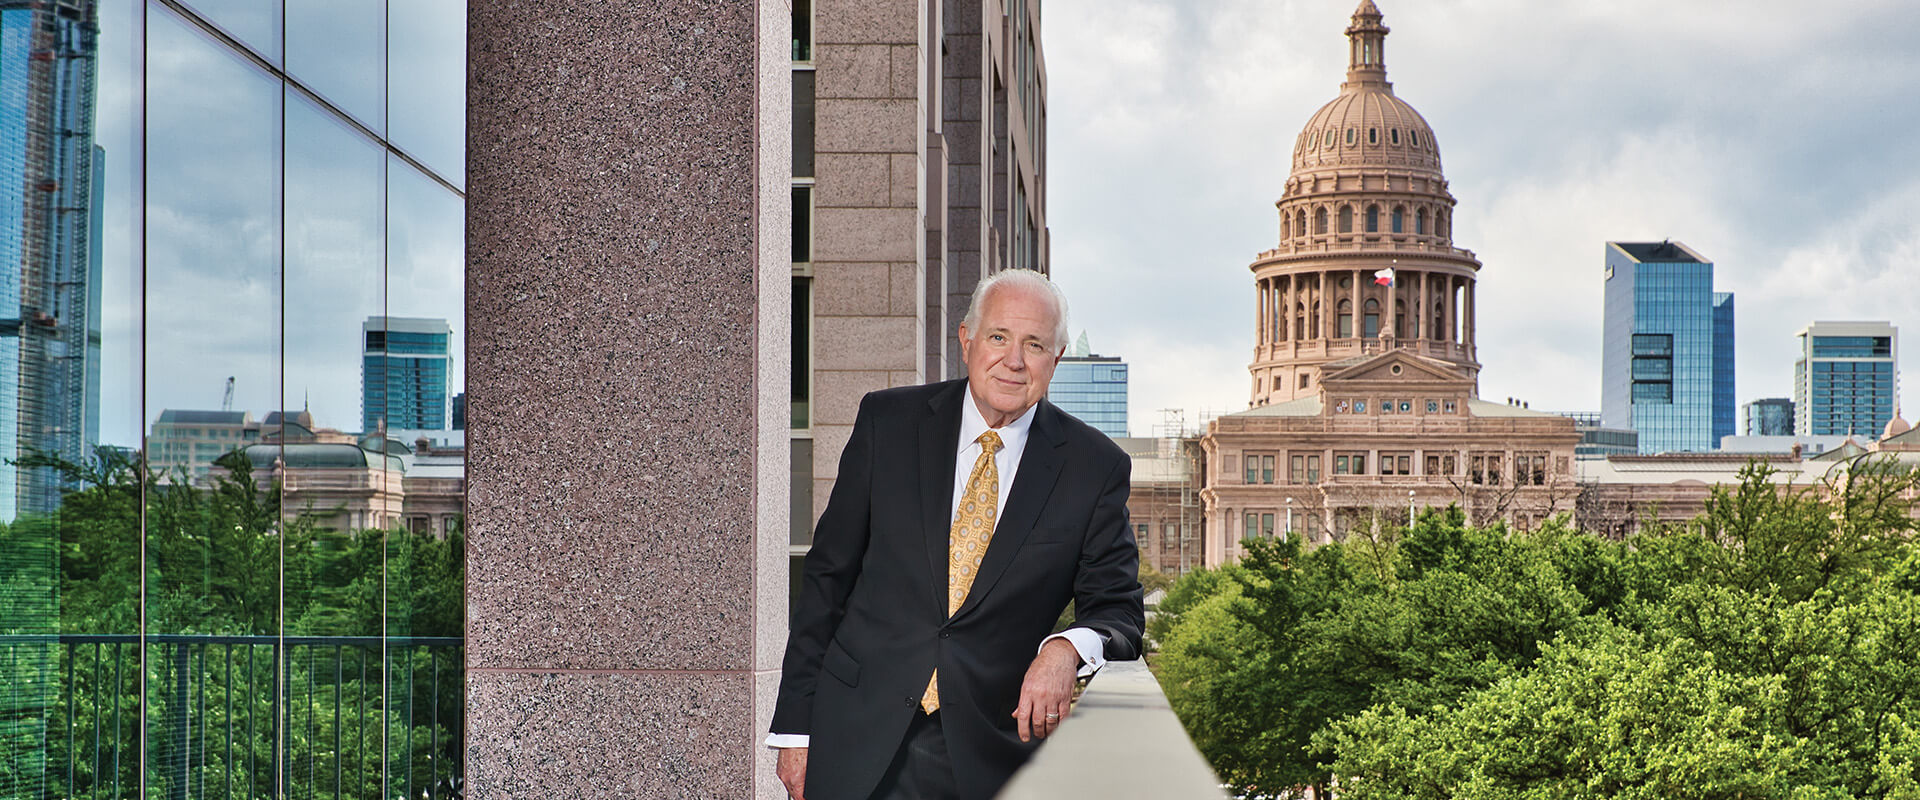 Mike Novak (B.B.A. ’75) poses outside of the capital in Austin.